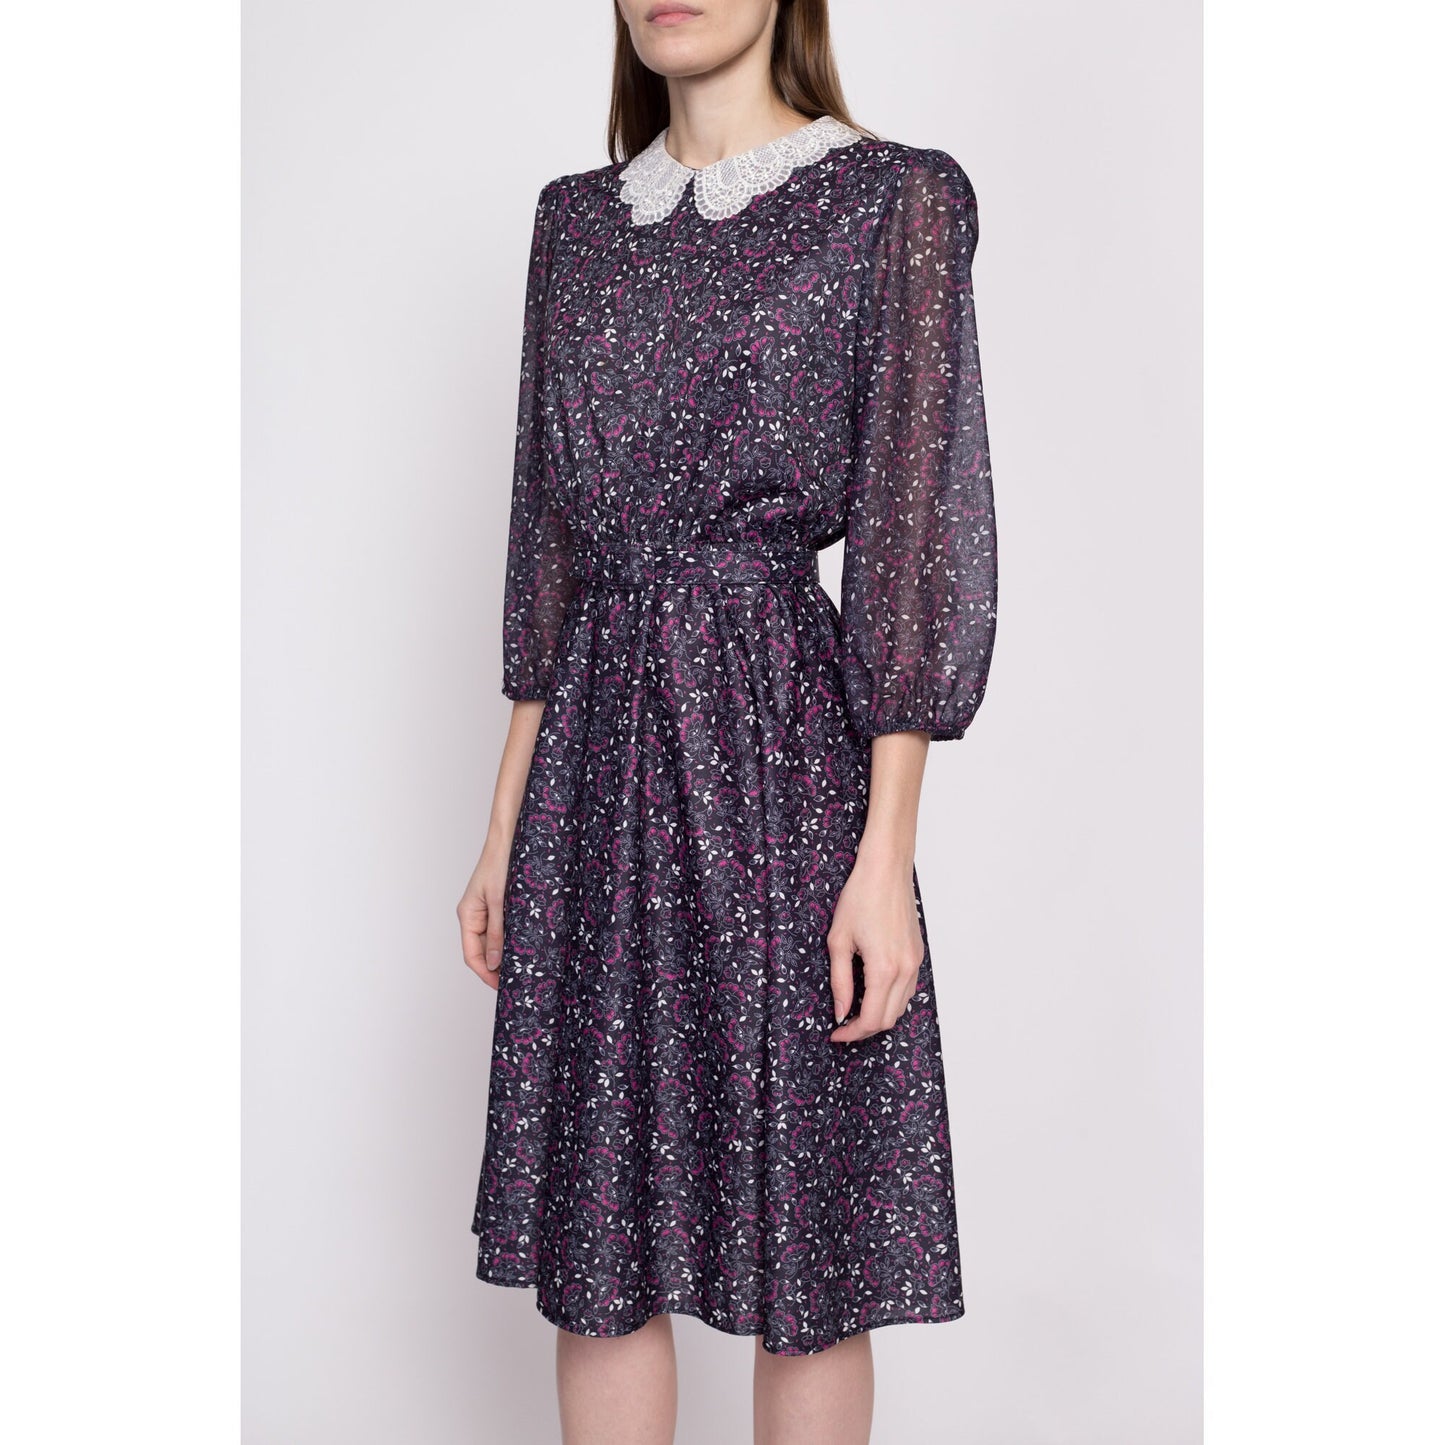 70s Floral Belted Midi Dress - Small to Medium | Vintage 3/4 Sleeve Lace Collar Secretary Dress